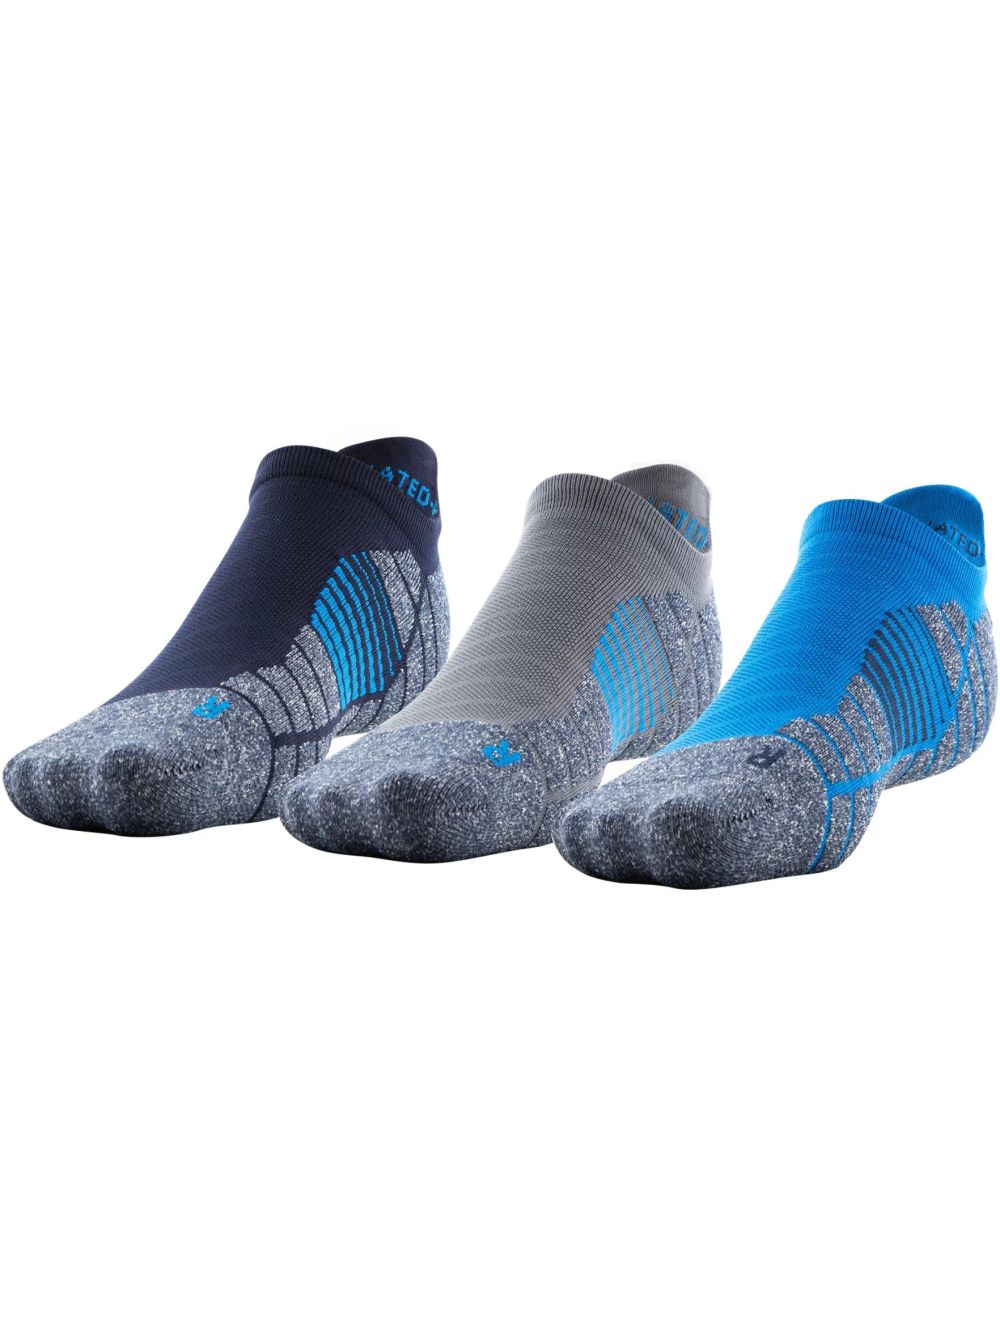 Under Armour UA Elevated+Performance No Show Socks 3-Pack 1357221 - Cruise Blue, L